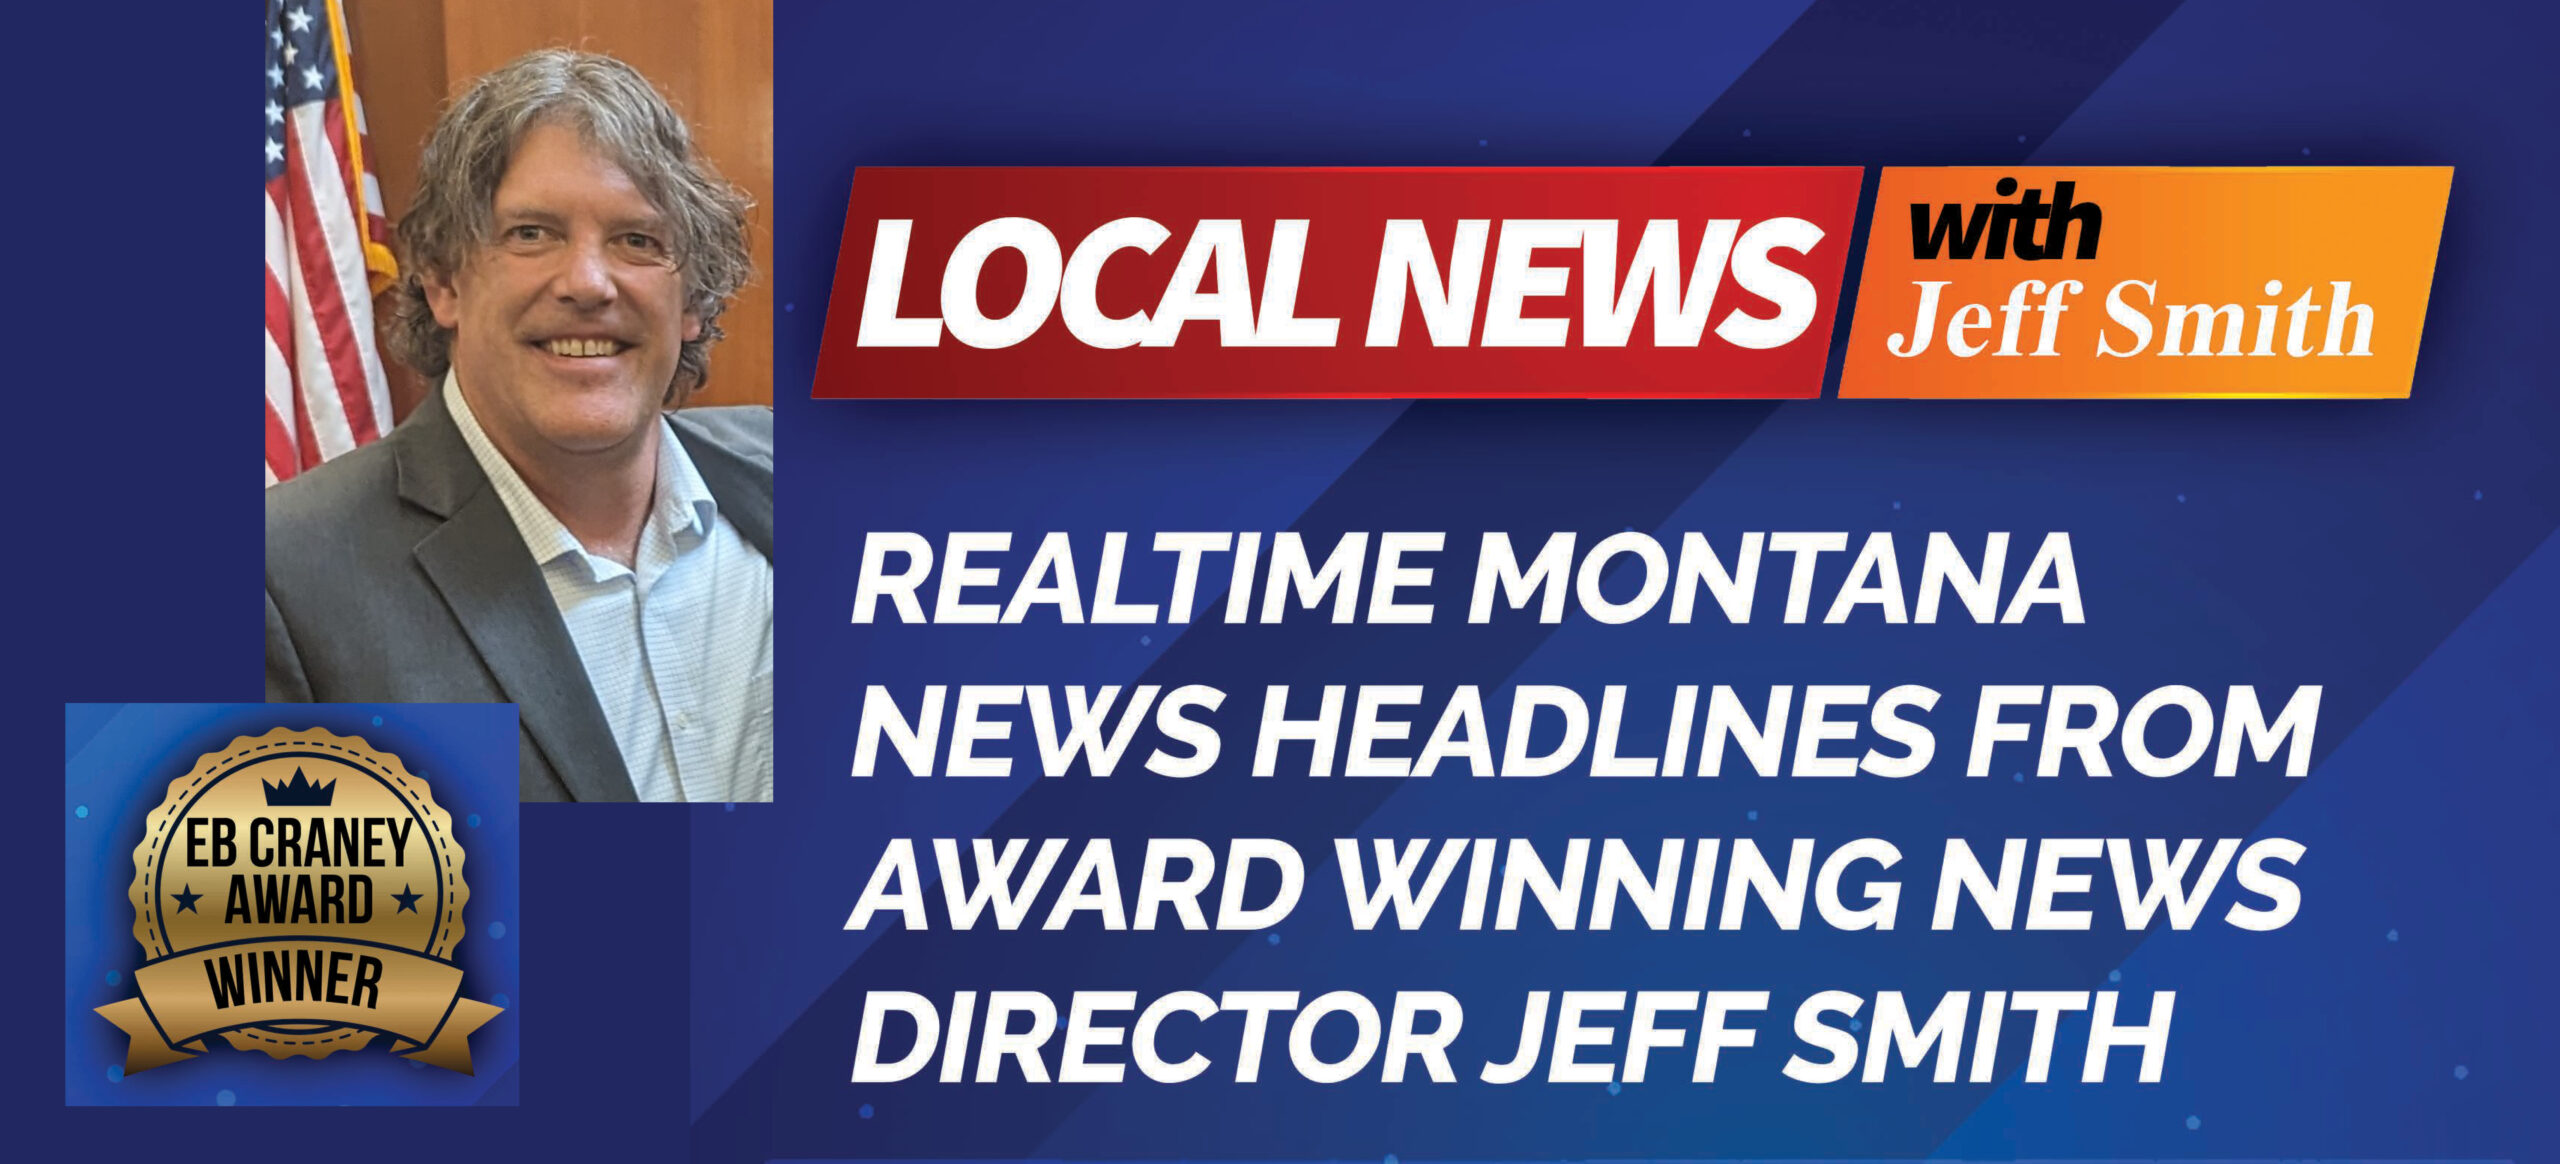 Latest Local News With Our News Director, Jeff Smith